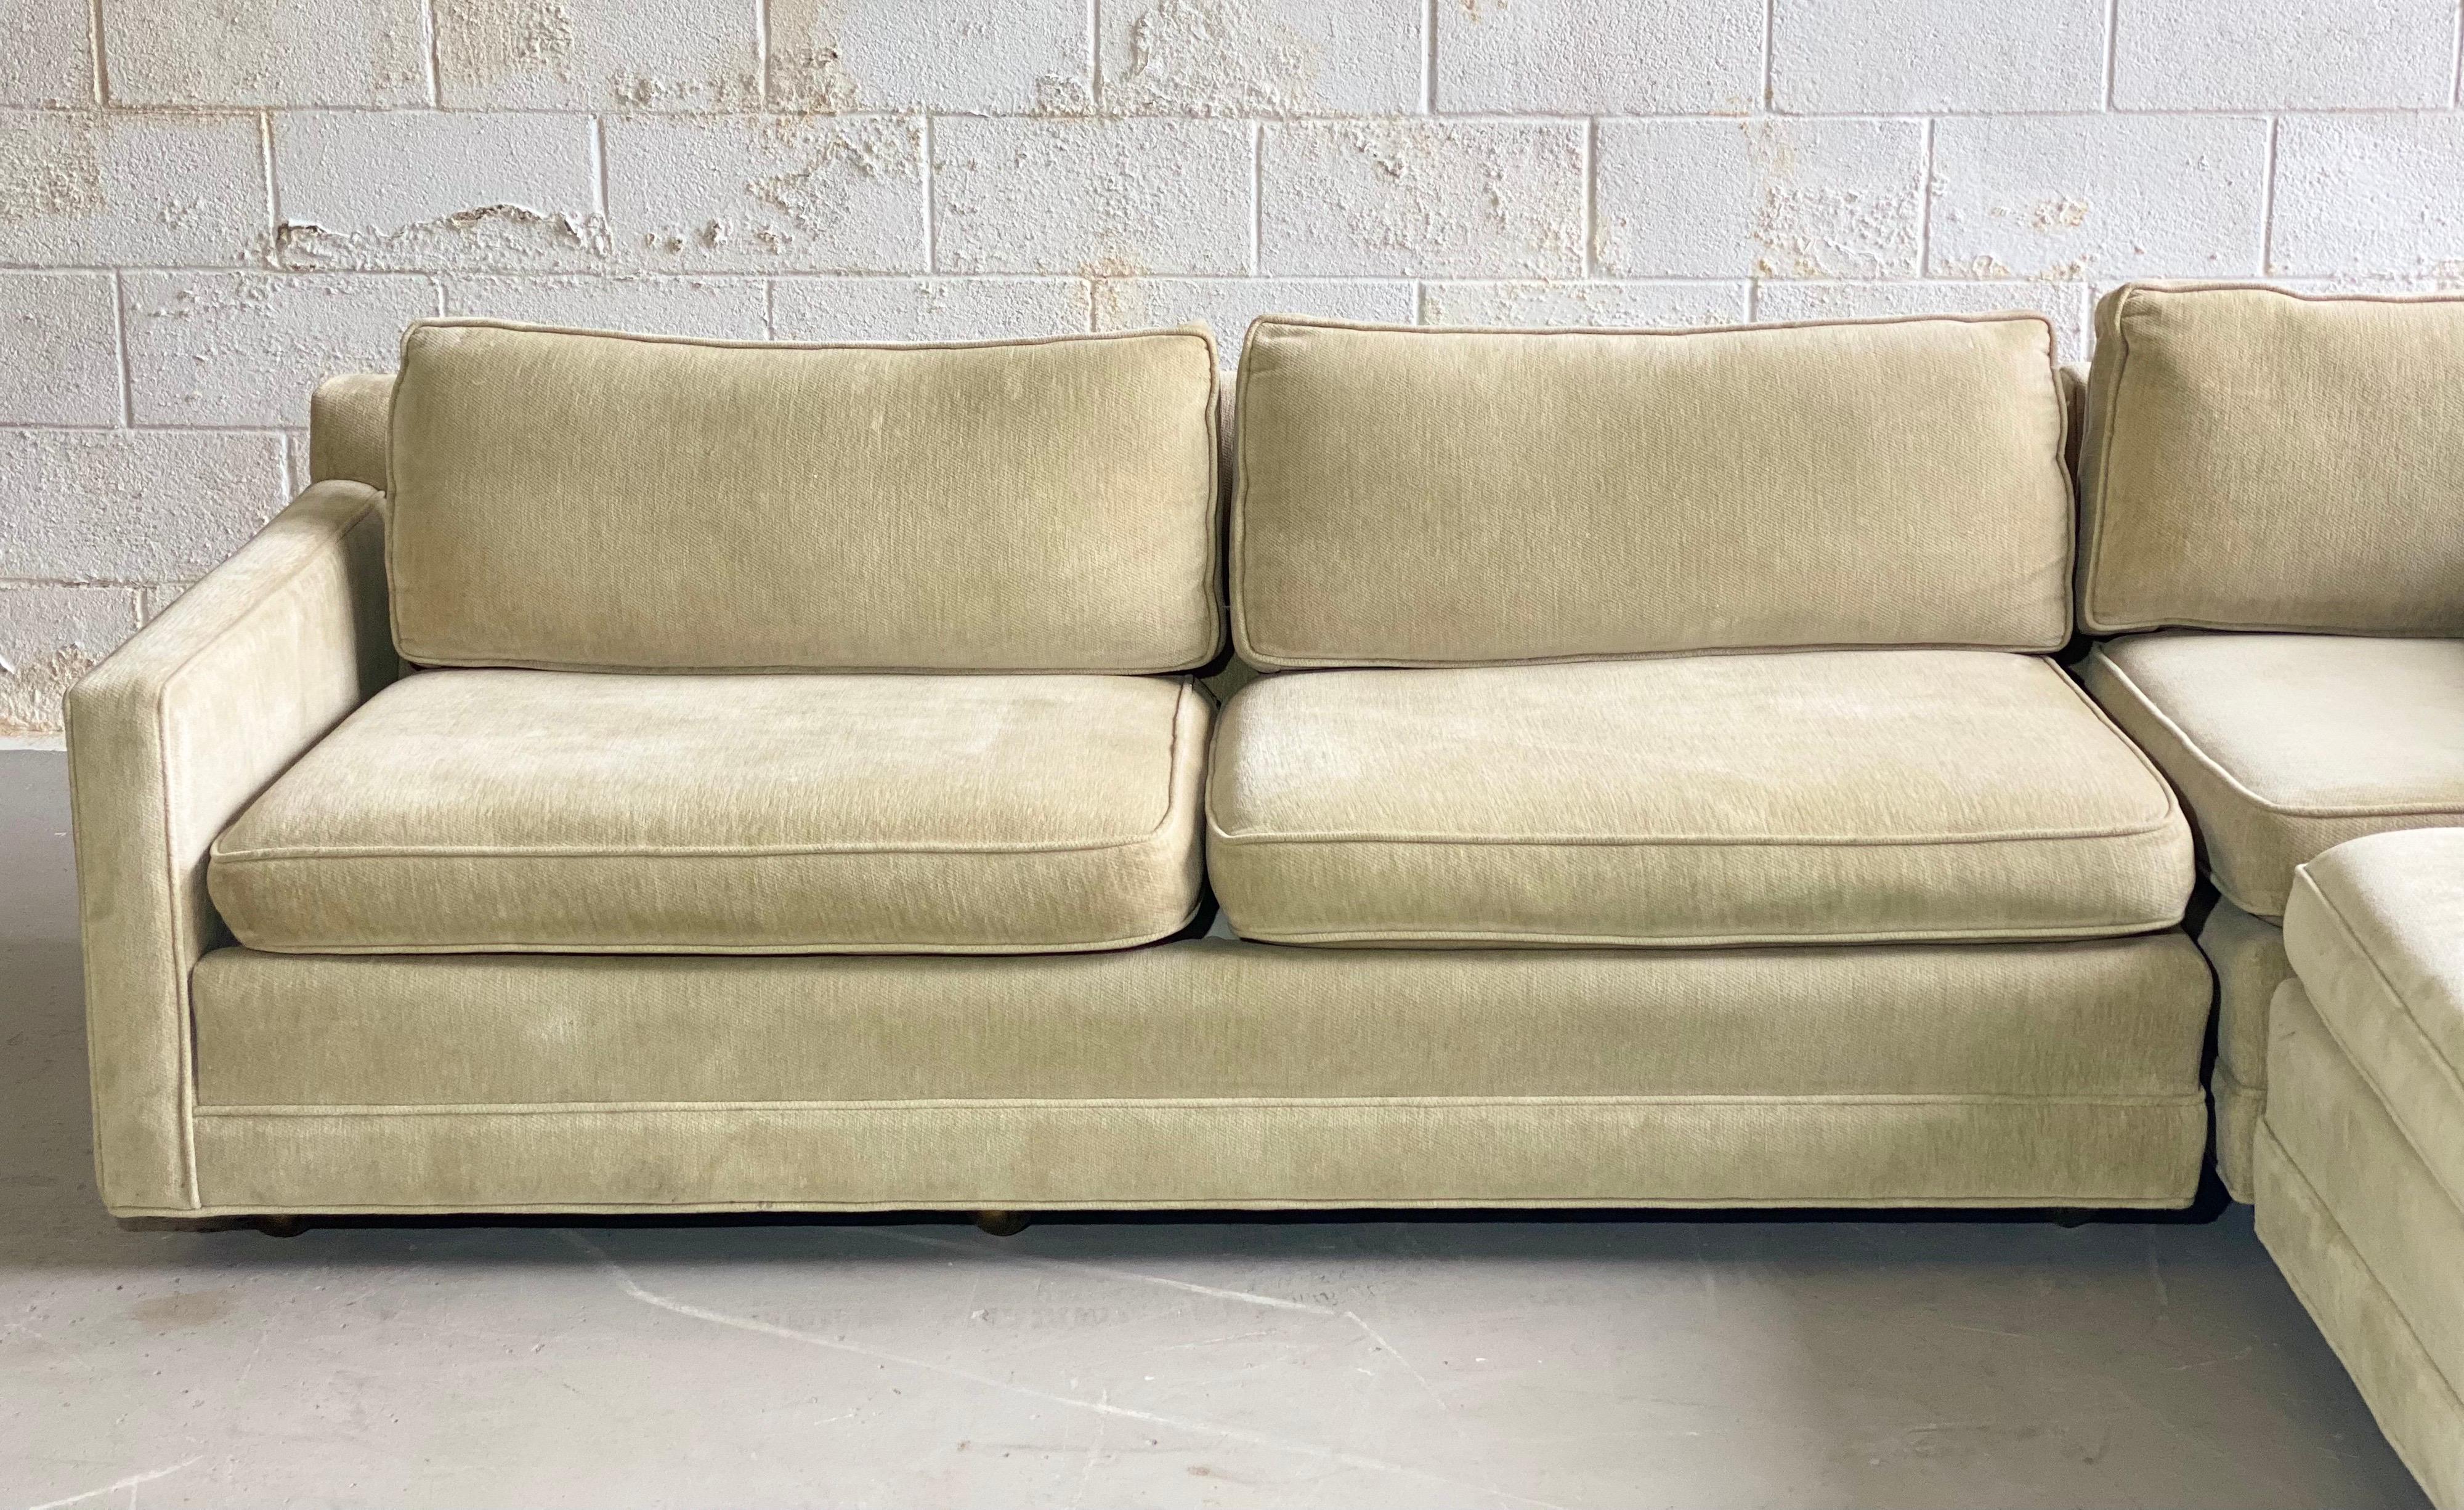 We are very pleased to offer a stylish, yet comfortable sectional in the style of Milo Baughman, circa the 1980s. This L-shape cornering sofa features slim arms, clean Mid-Century lines and unparalleled comfort. Tailored in an off-white wheat